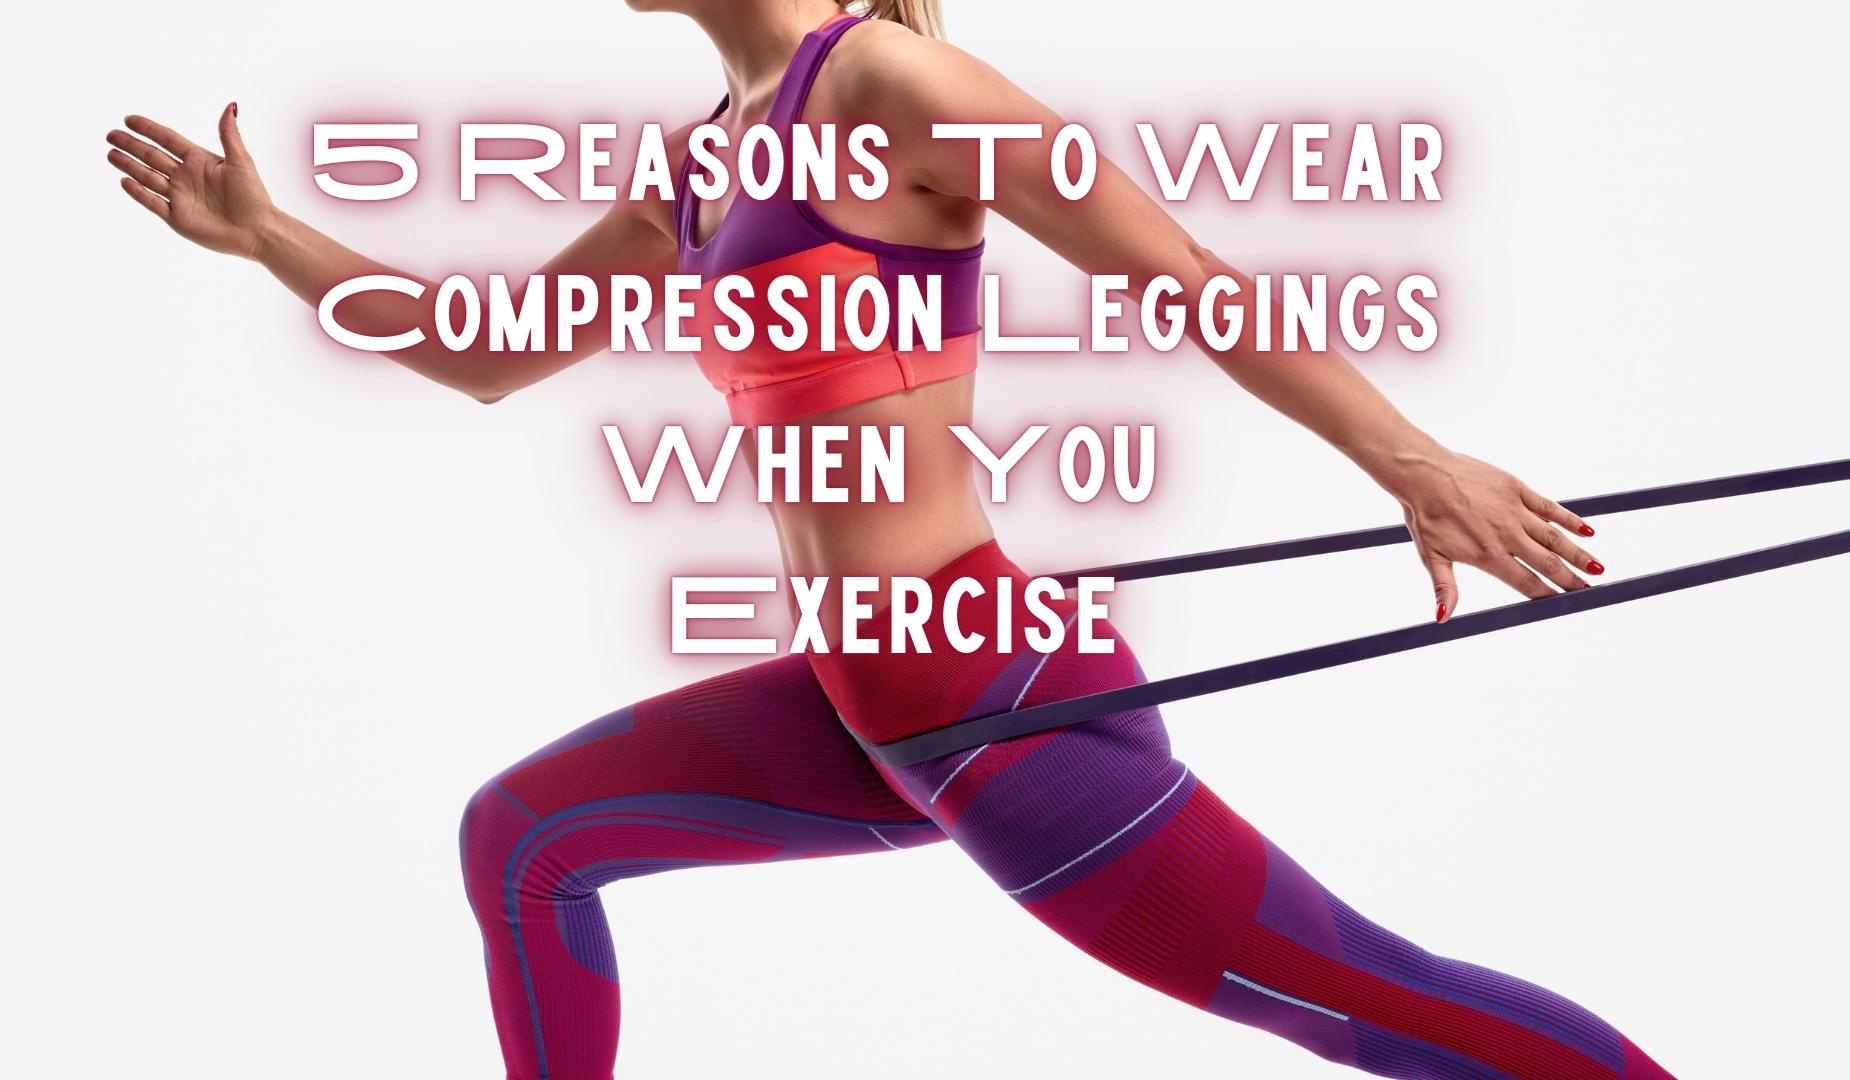 5 Reasons To Wear Compression Leggings When You Exercise